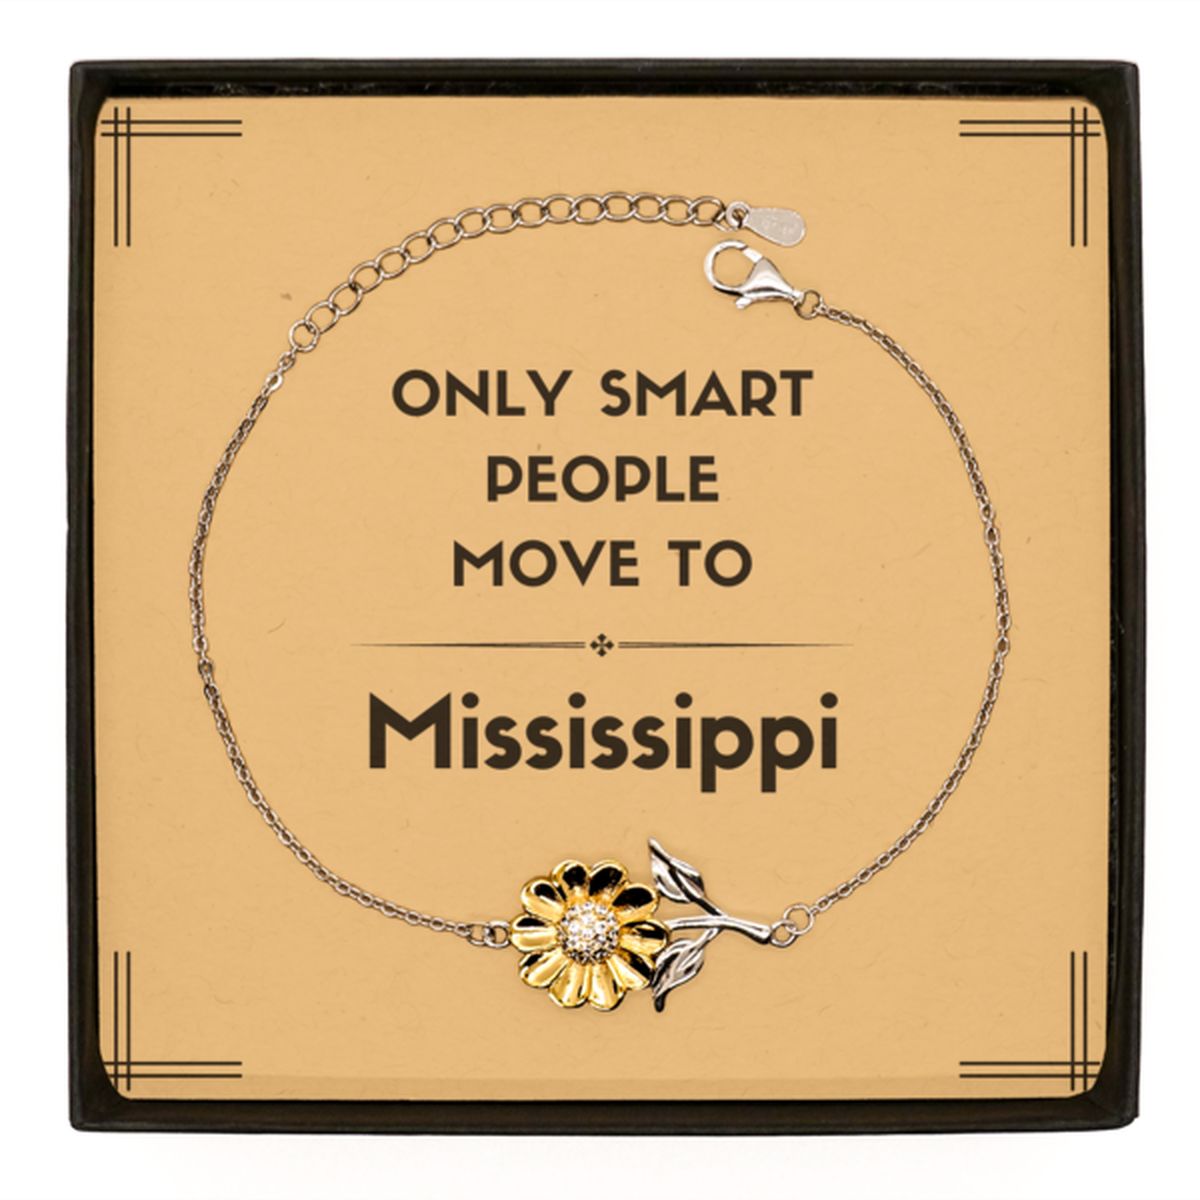 Only smart people move to Mississippi Sunflower Bracelet, Message Card Gifts For Mississippi, Move to Mississippi Gifts for Friends Coworker Funny Saying Quote